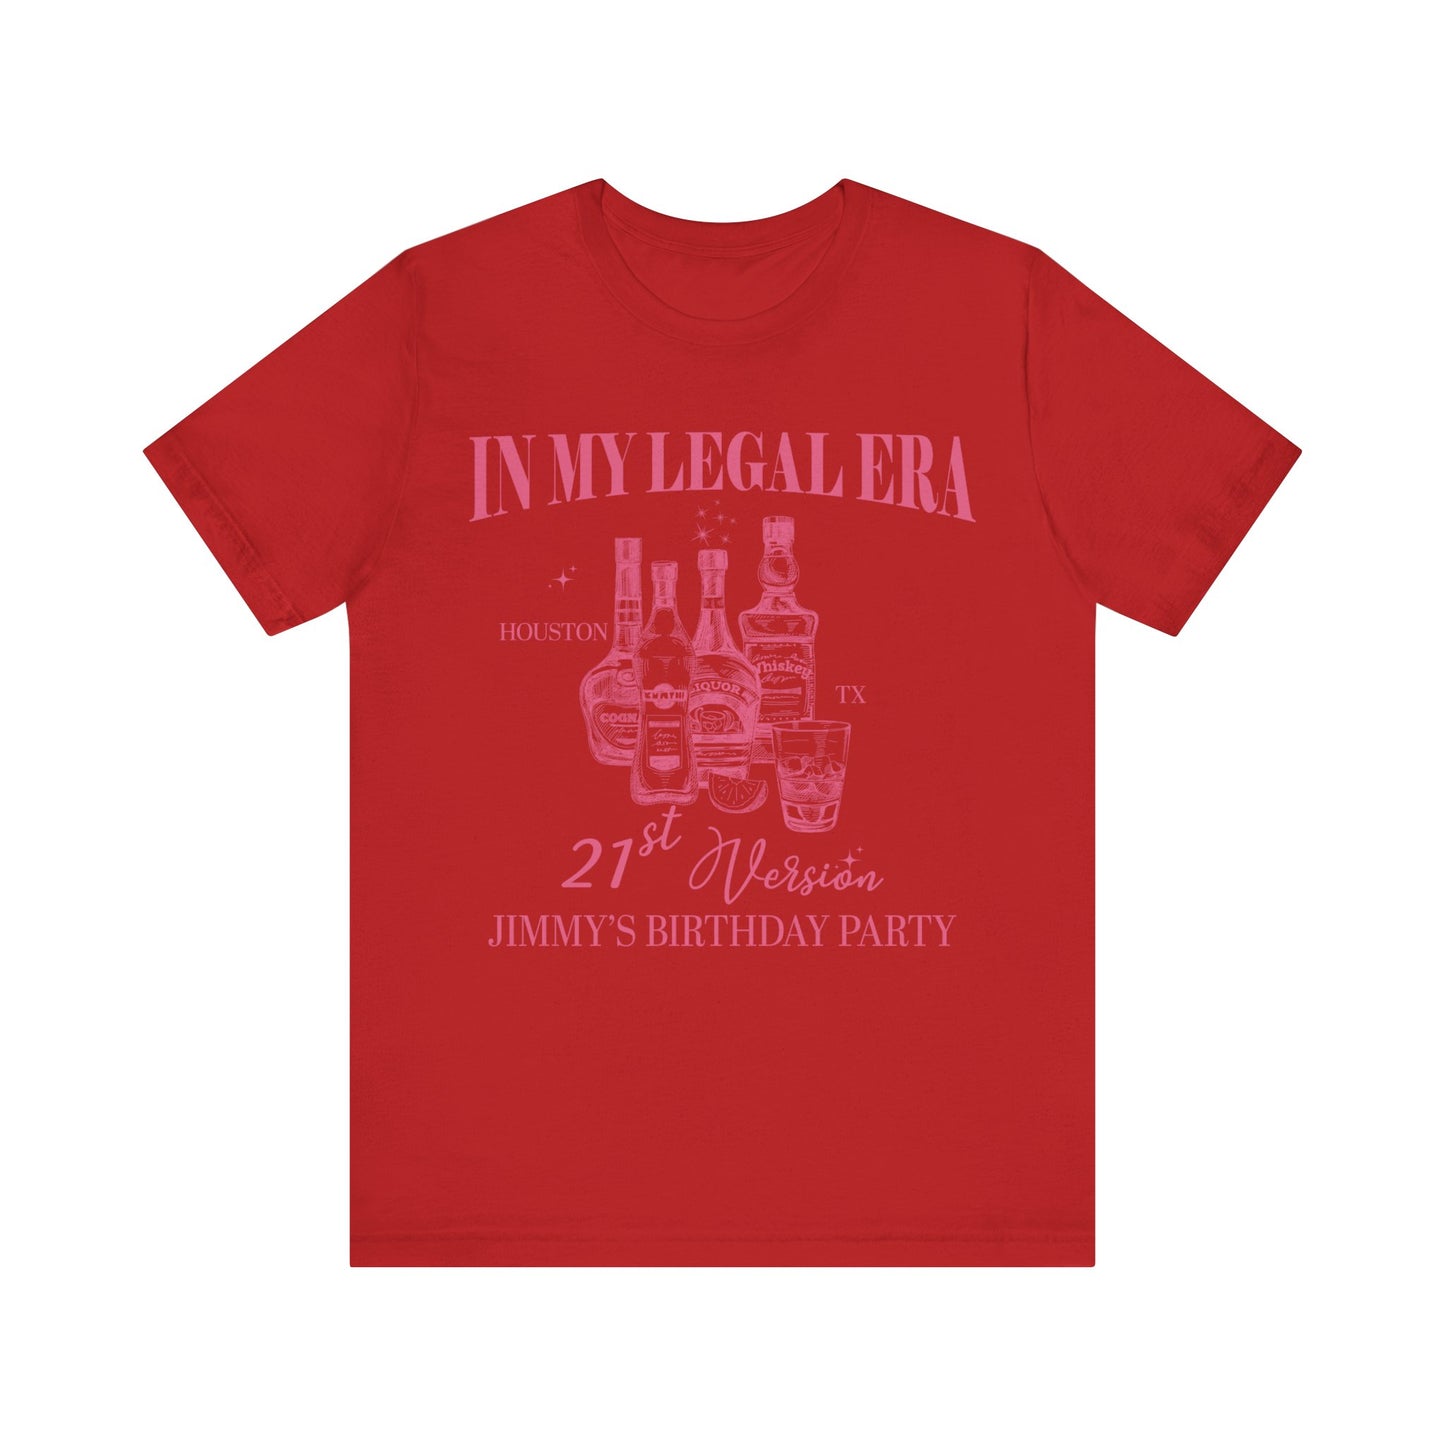 21st Birthday Shirt, In My Legal Era Shirt, Funny 21st Birthday Shirts, Gift for 21st Birthday, 21st Birthday Shirts for Group, T1567